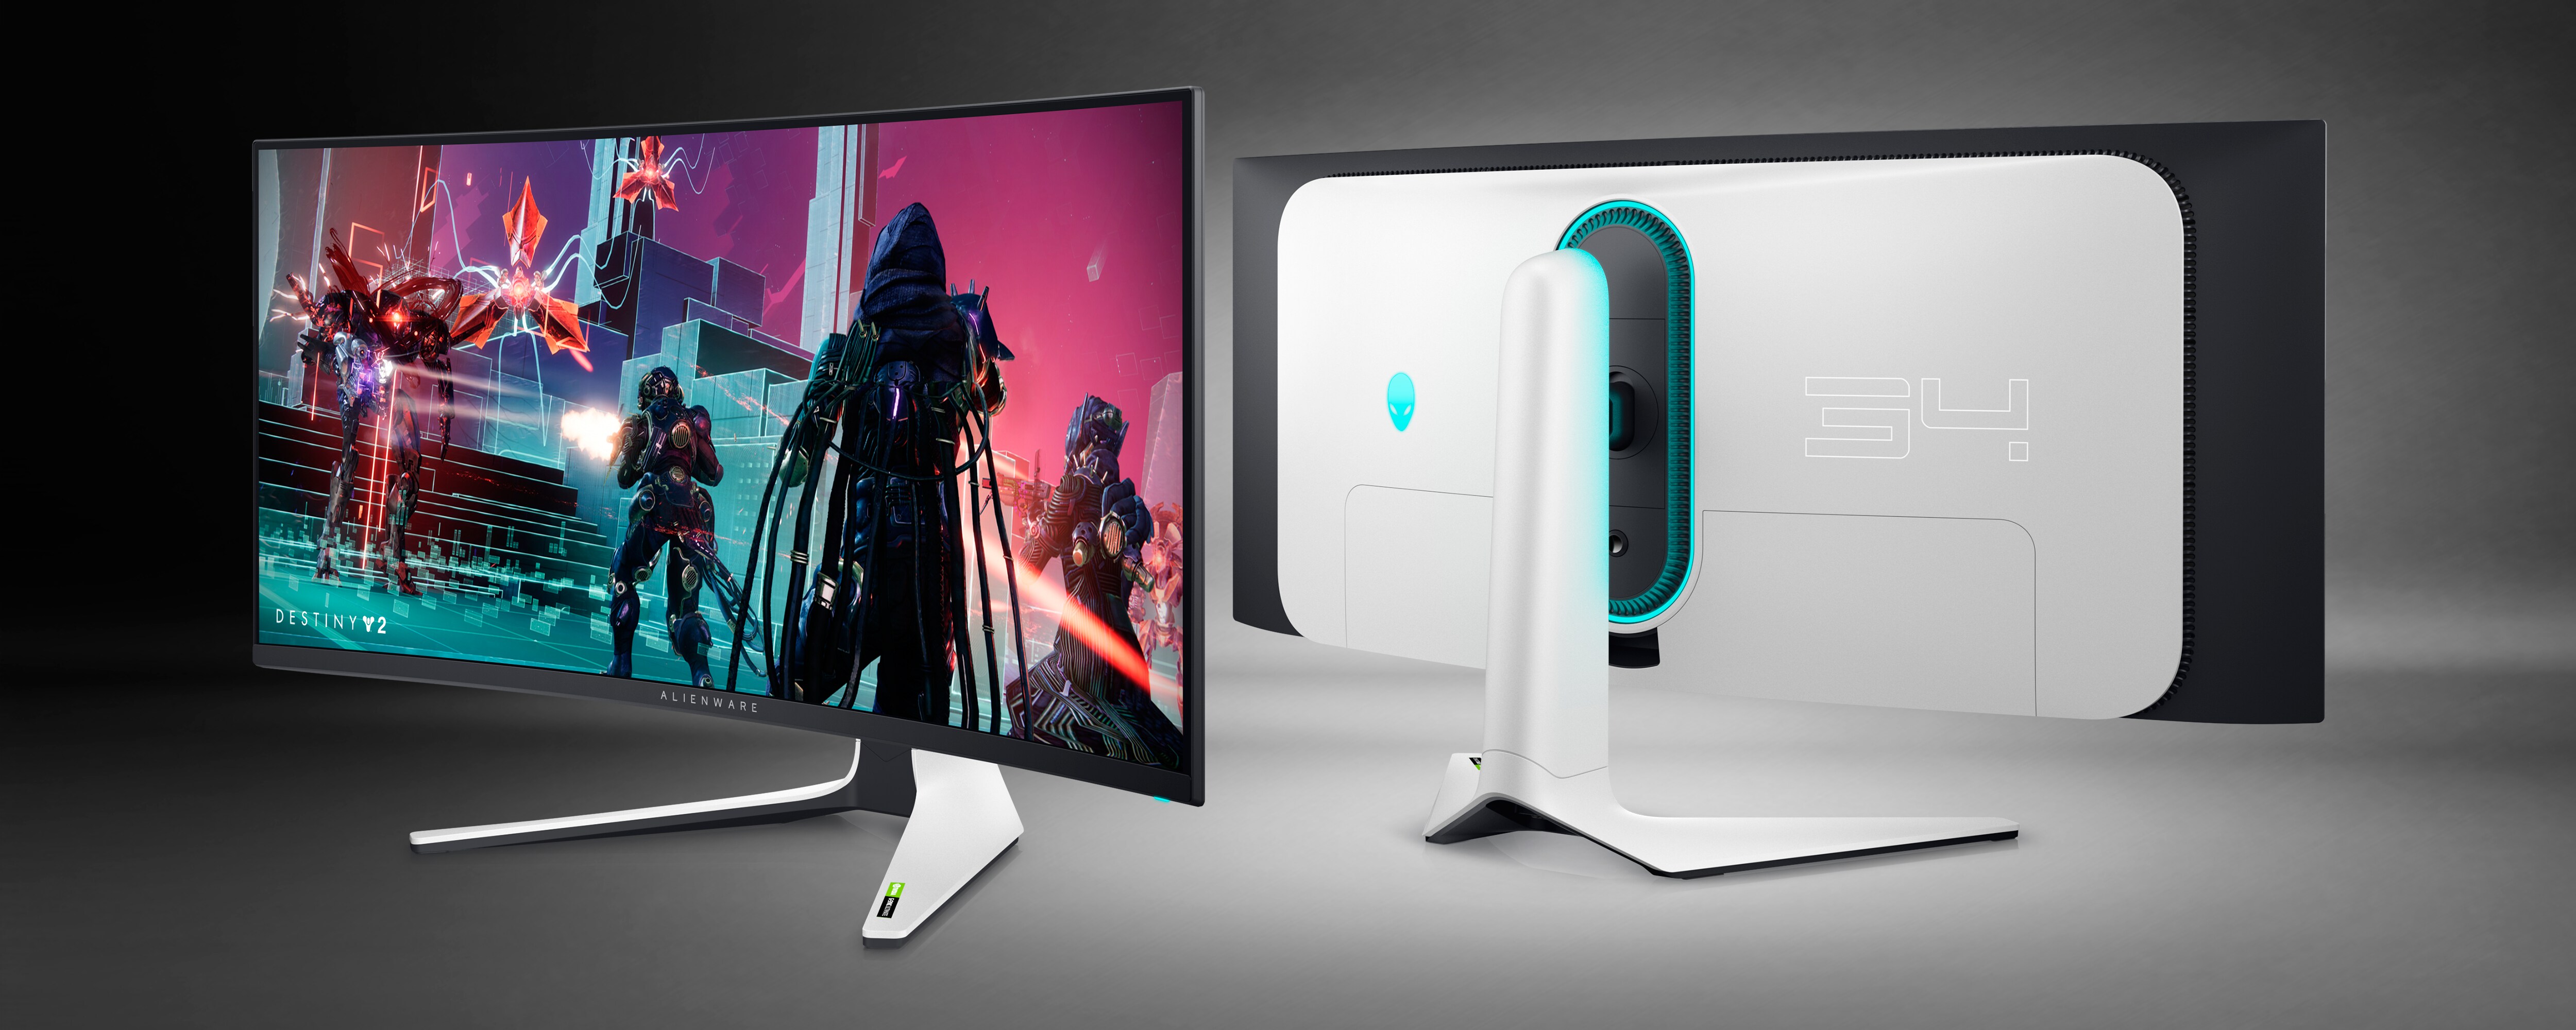 Alienware 34 Curved QD-OLED Gaming Monitor AW3423DW | Dell USA